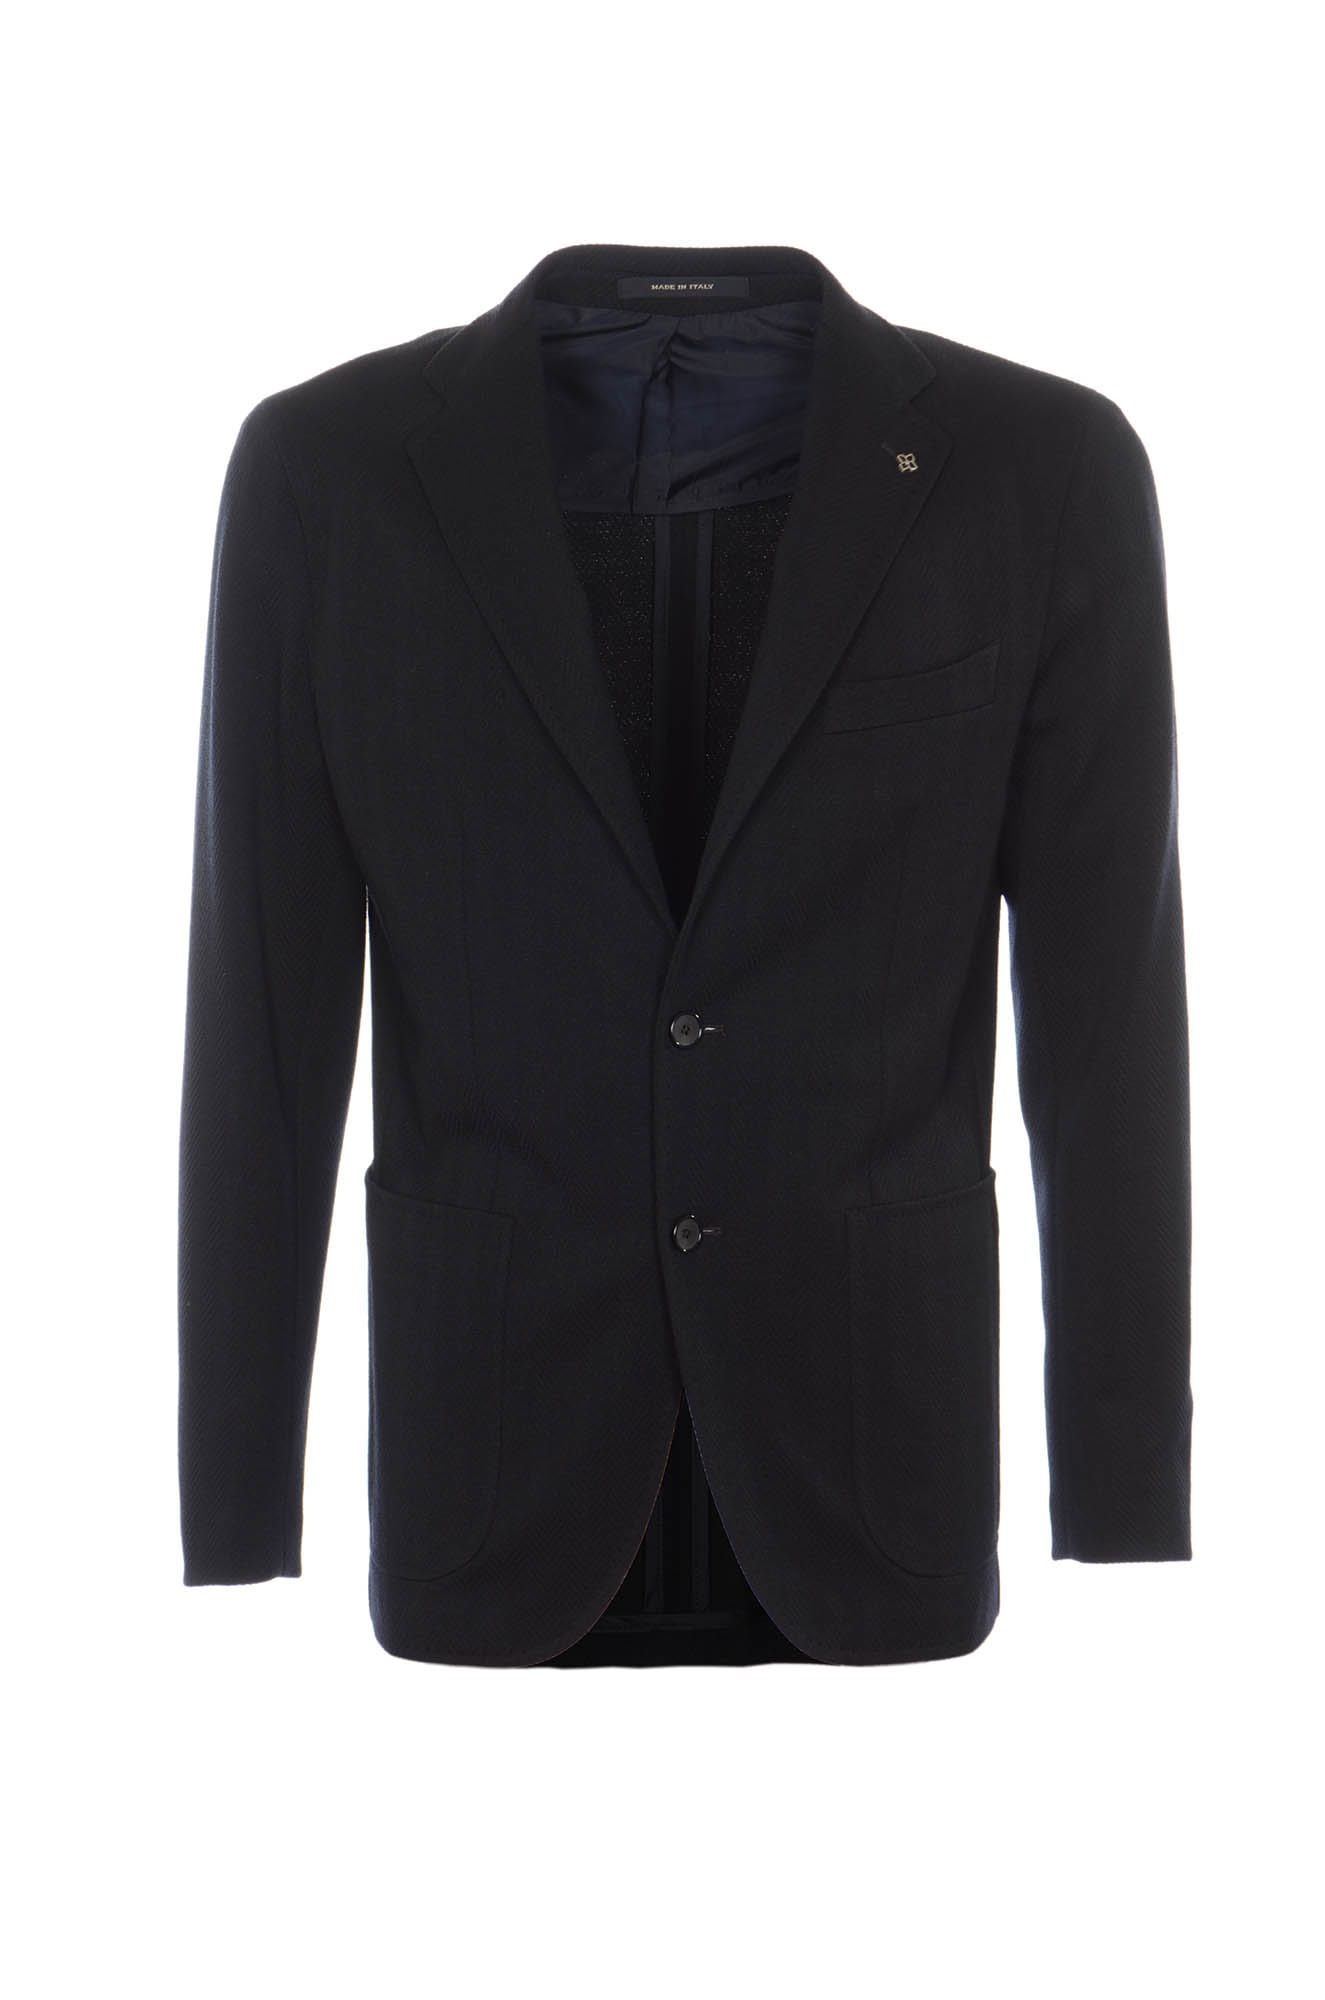 Tagliatore Two Buttoned Patched Pocket Blazer